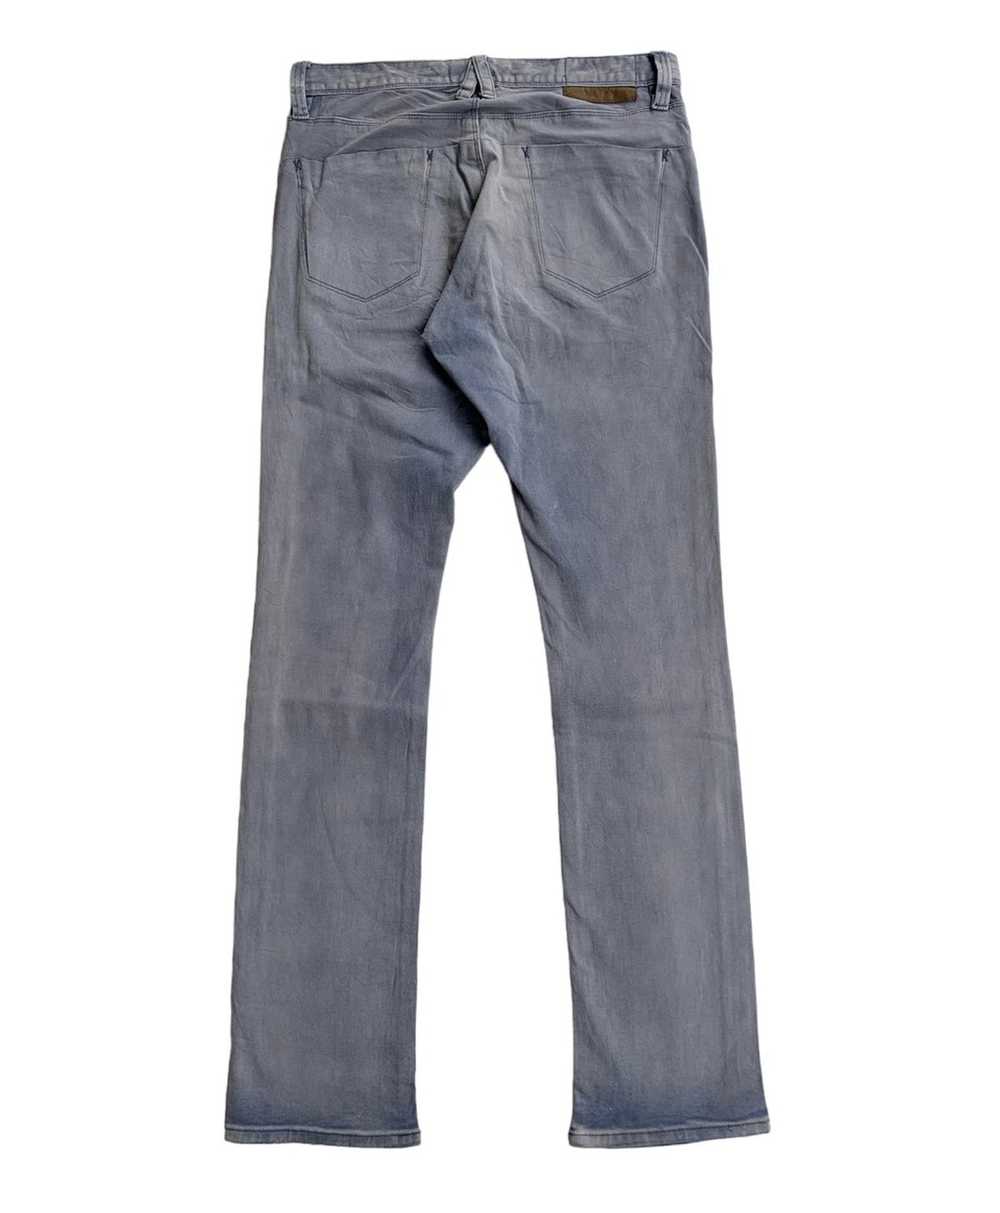 Morgan Homme Morgan Homme bootcut jeans - image 2